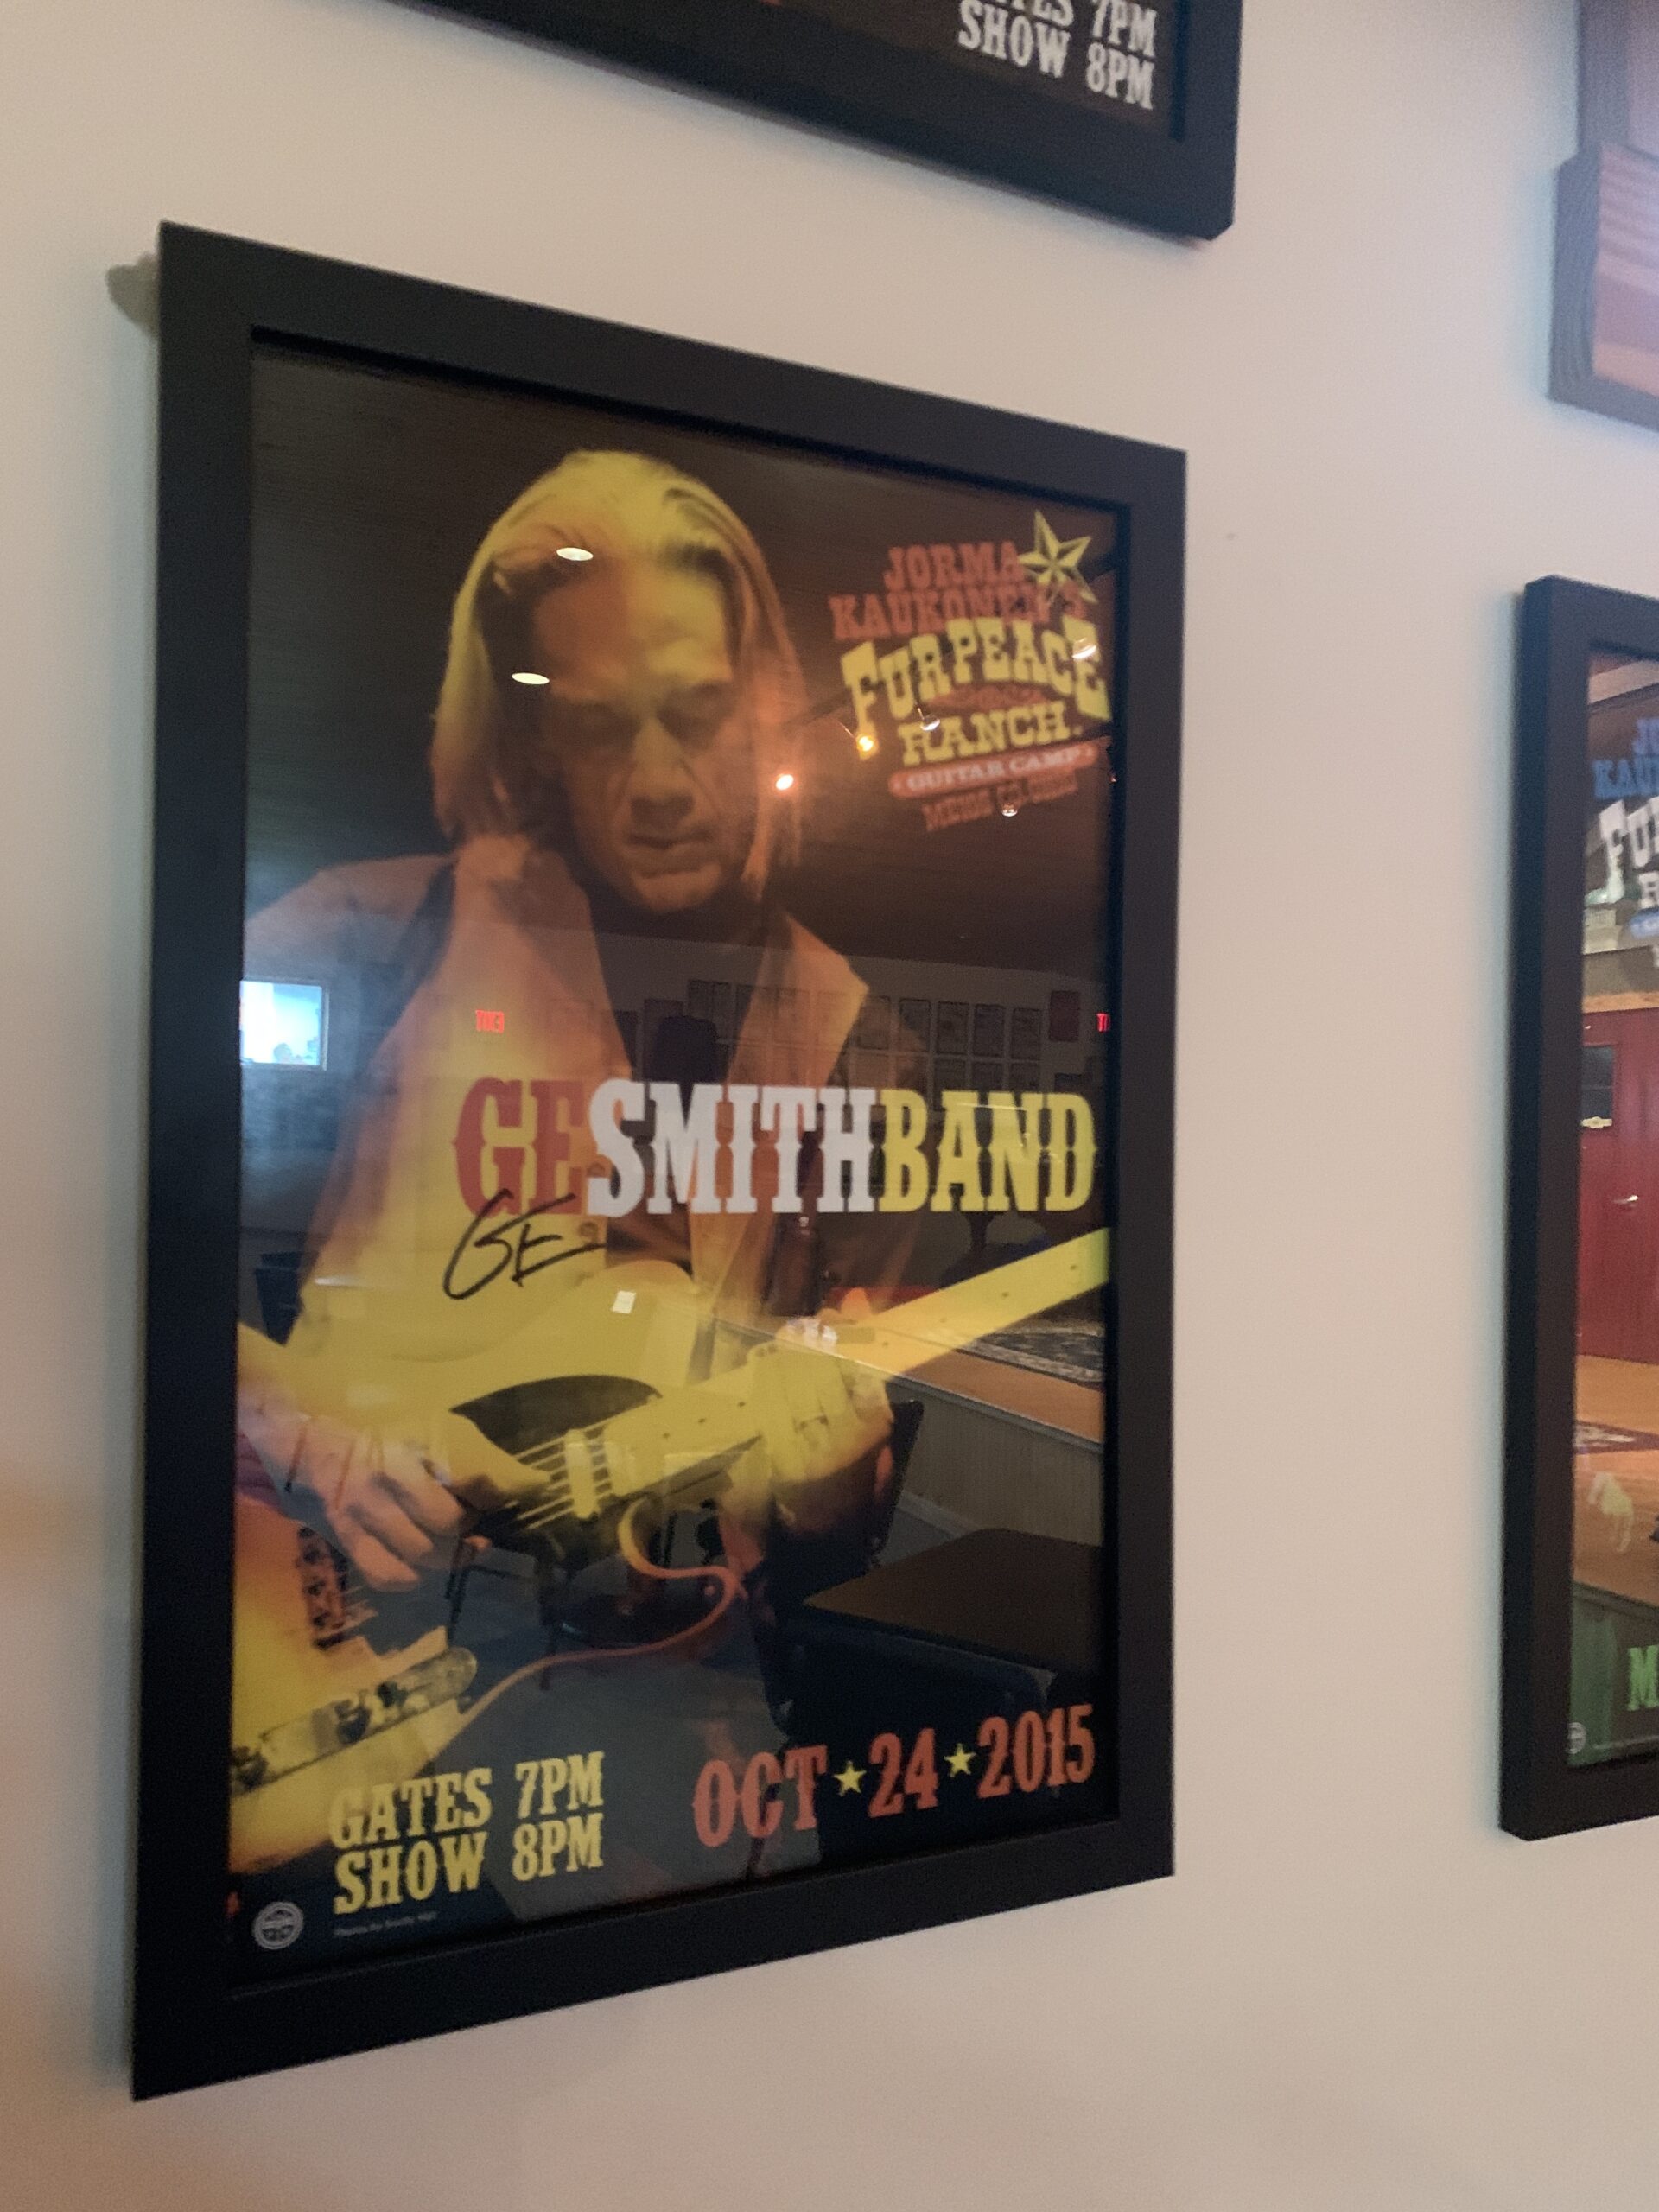 A G.E. Smith poster at Jorma Kaukonen's Fur Peace Ranch in southern Ohio. ANNETTE HINKLE